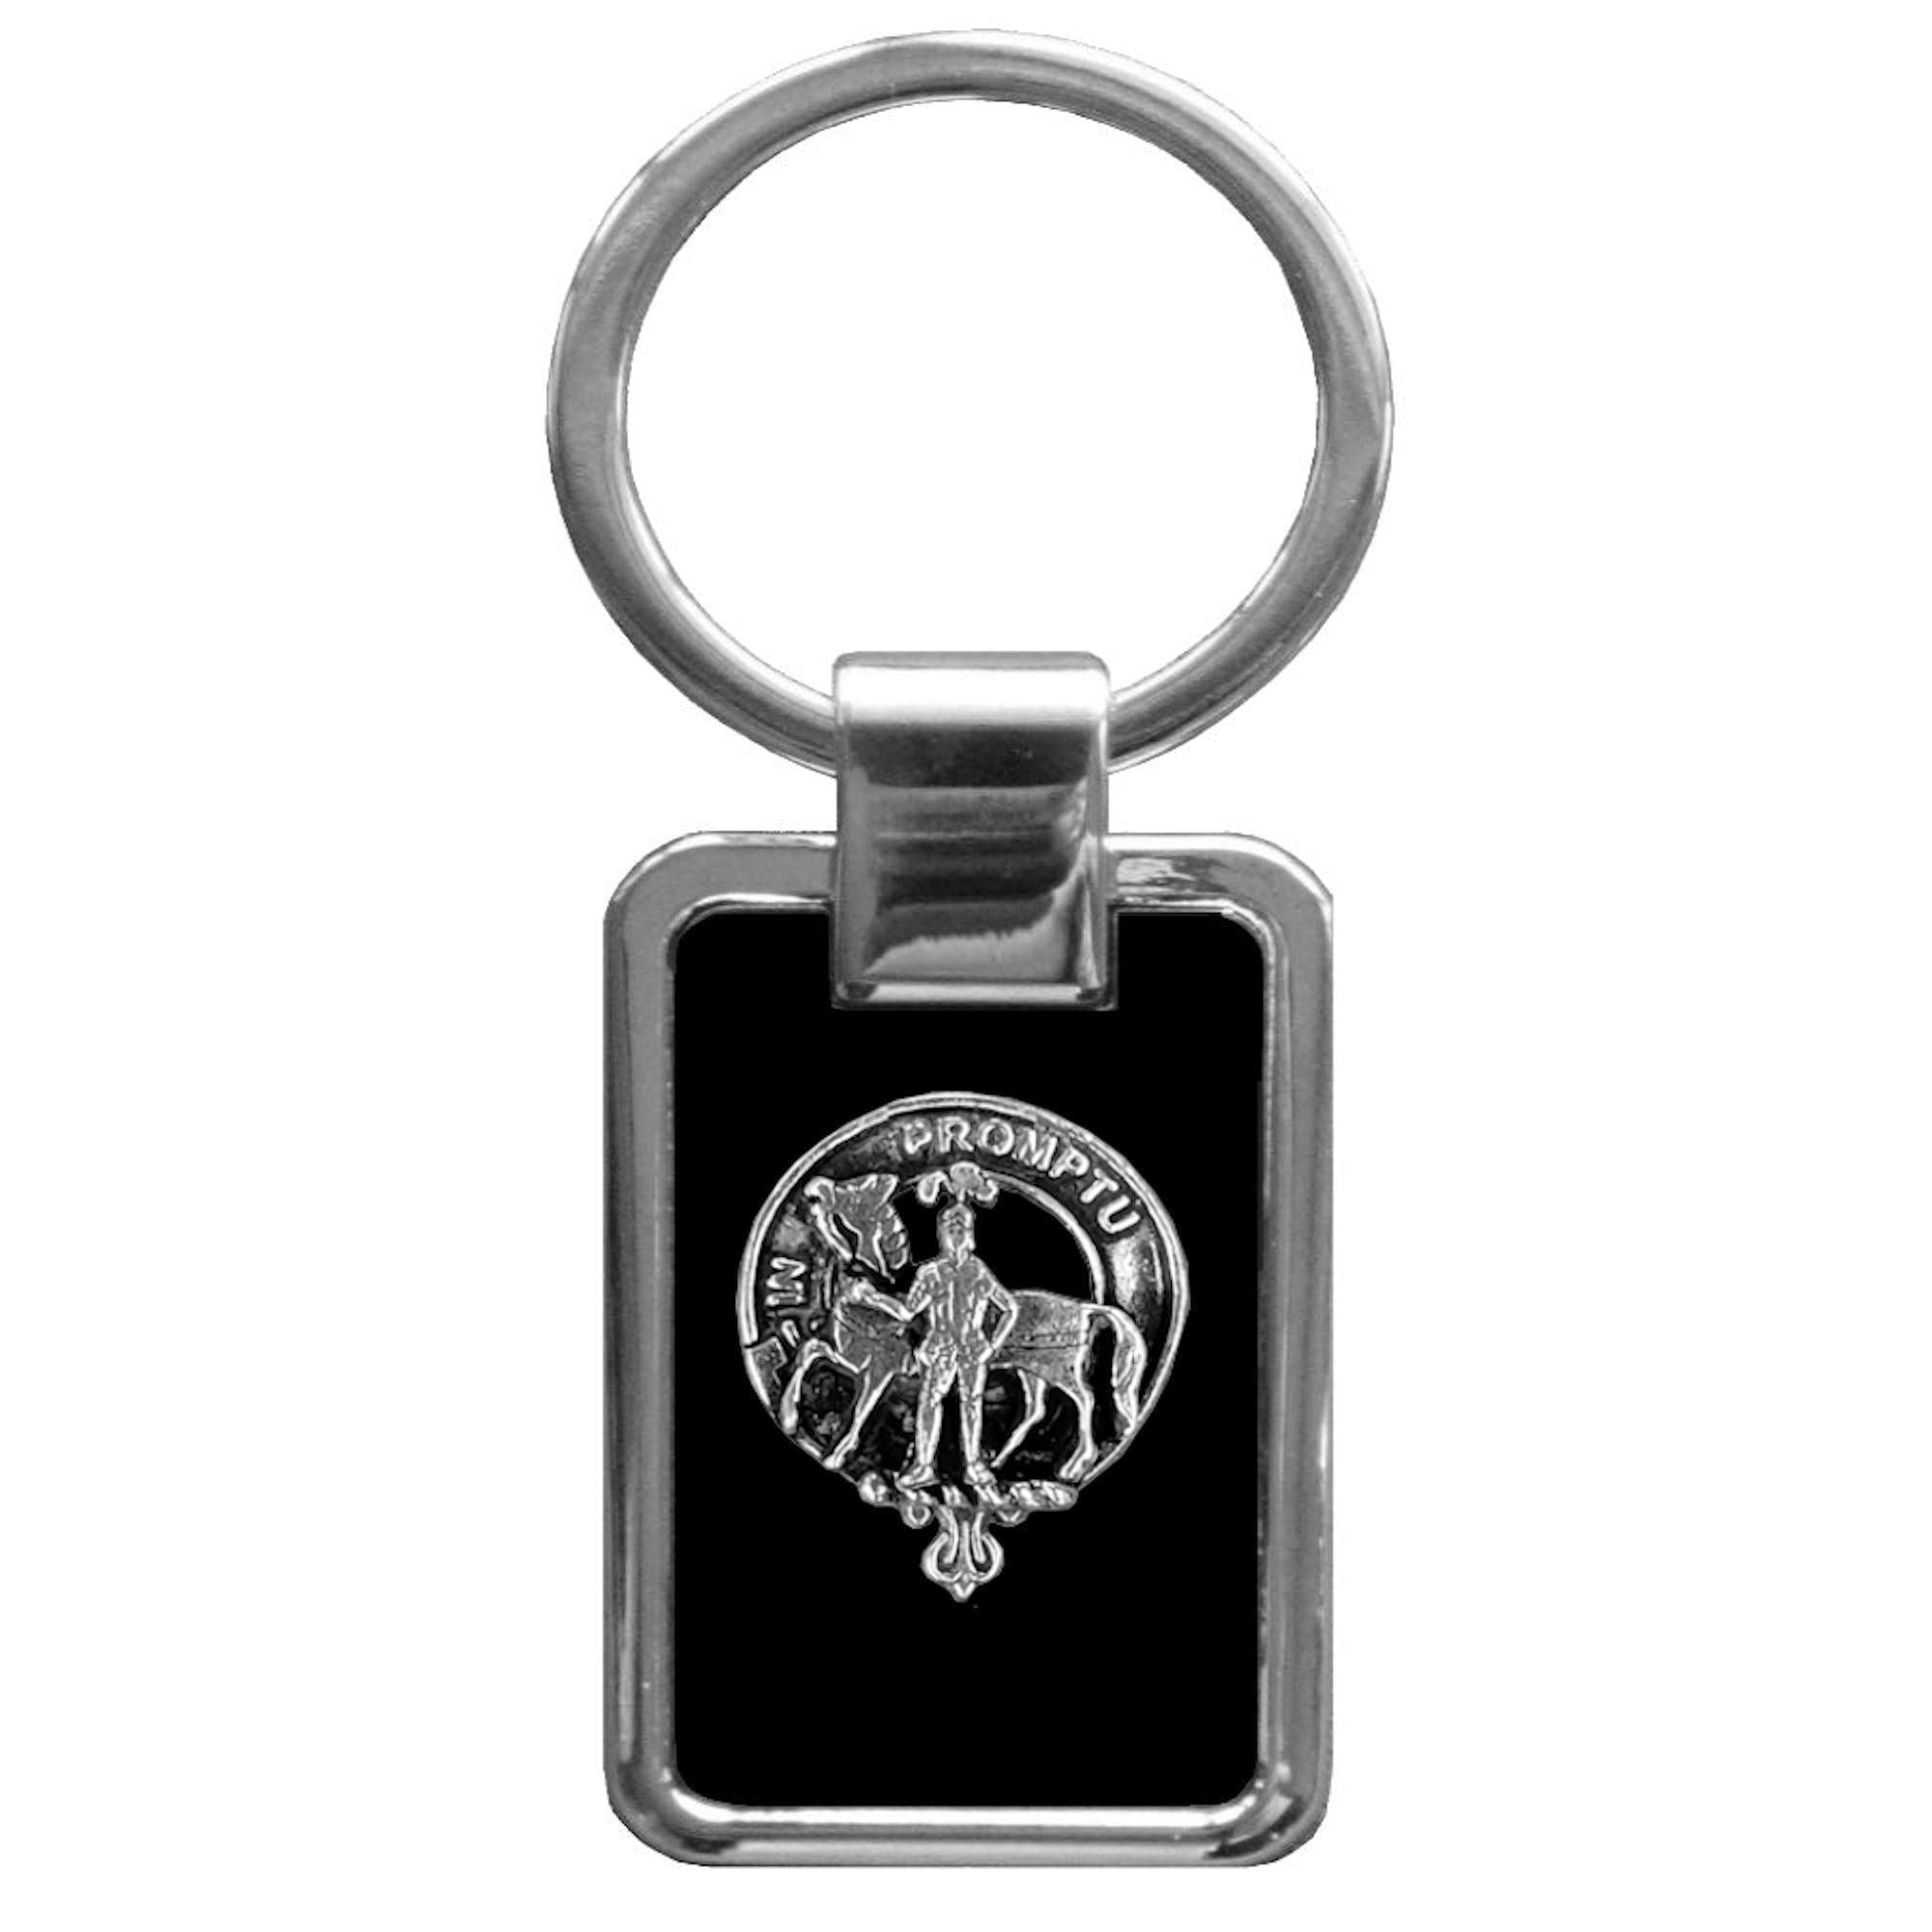 Trotter Clan Stainless Steel Key Ring